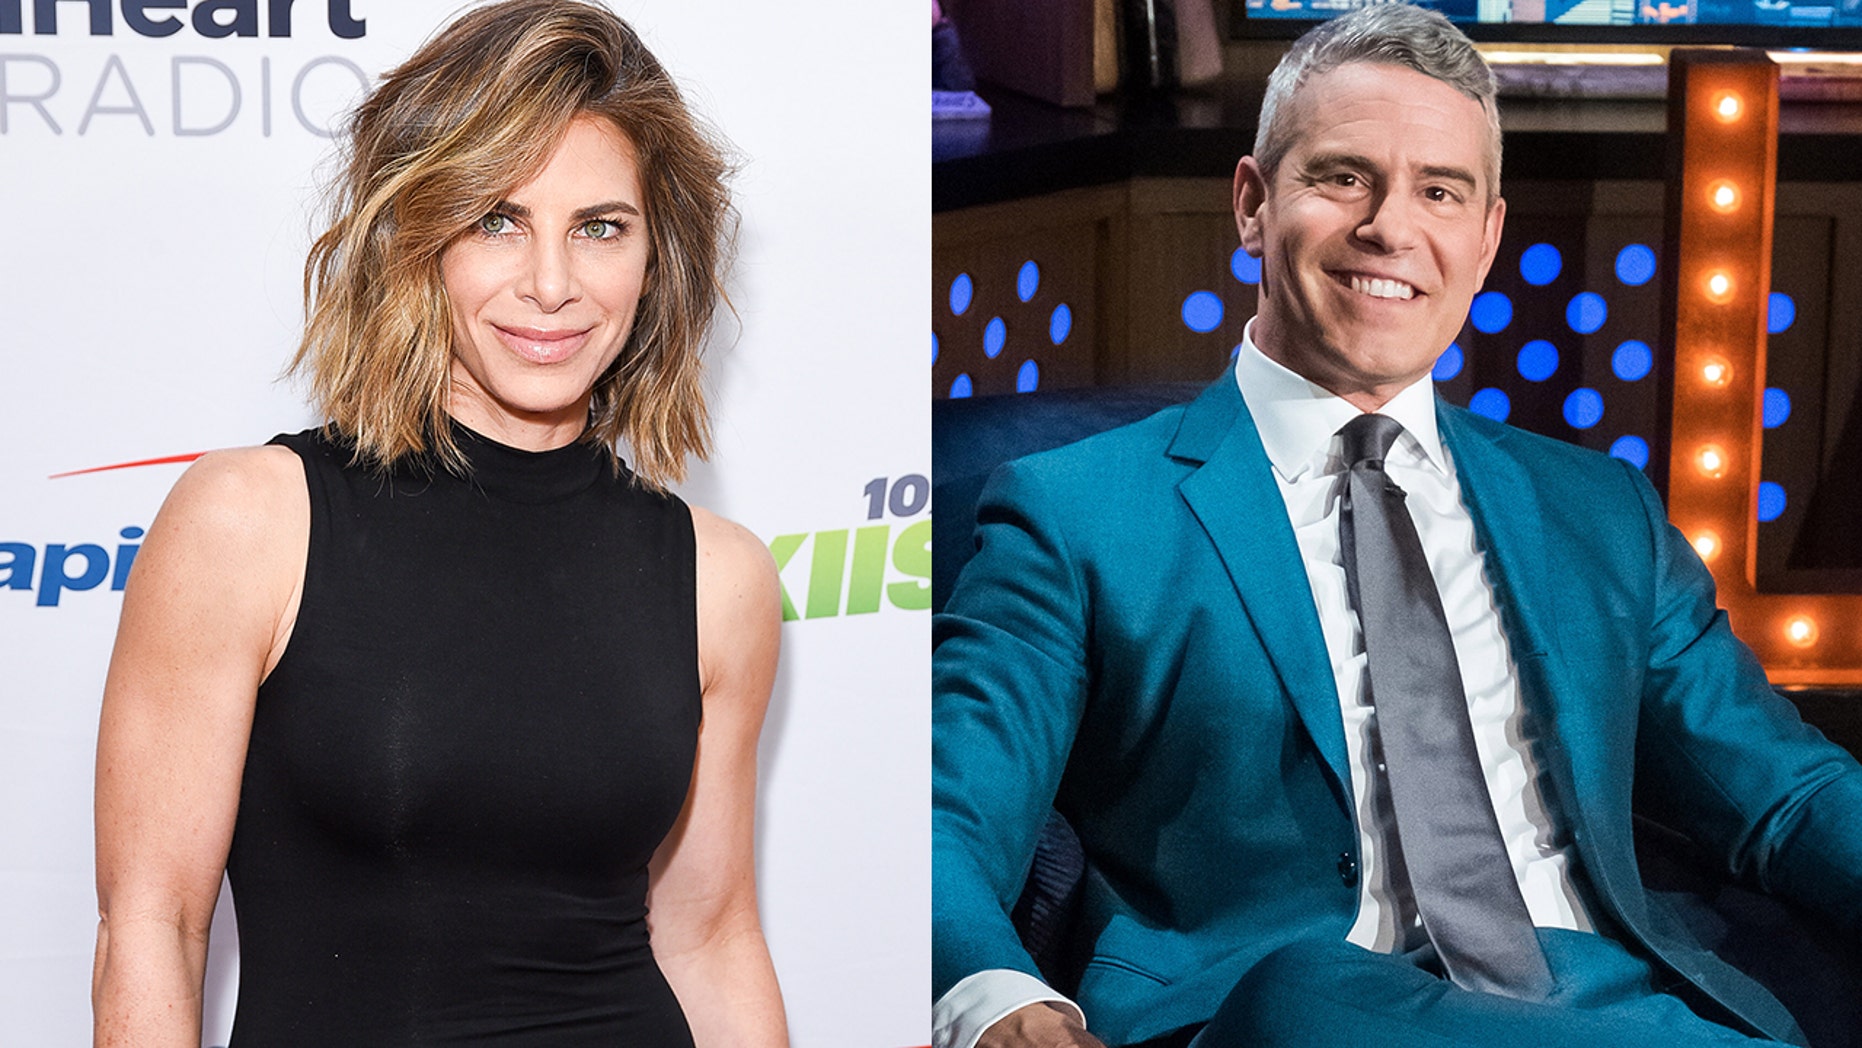 Jillian Michaels continues her feud with Andy Cohen: 